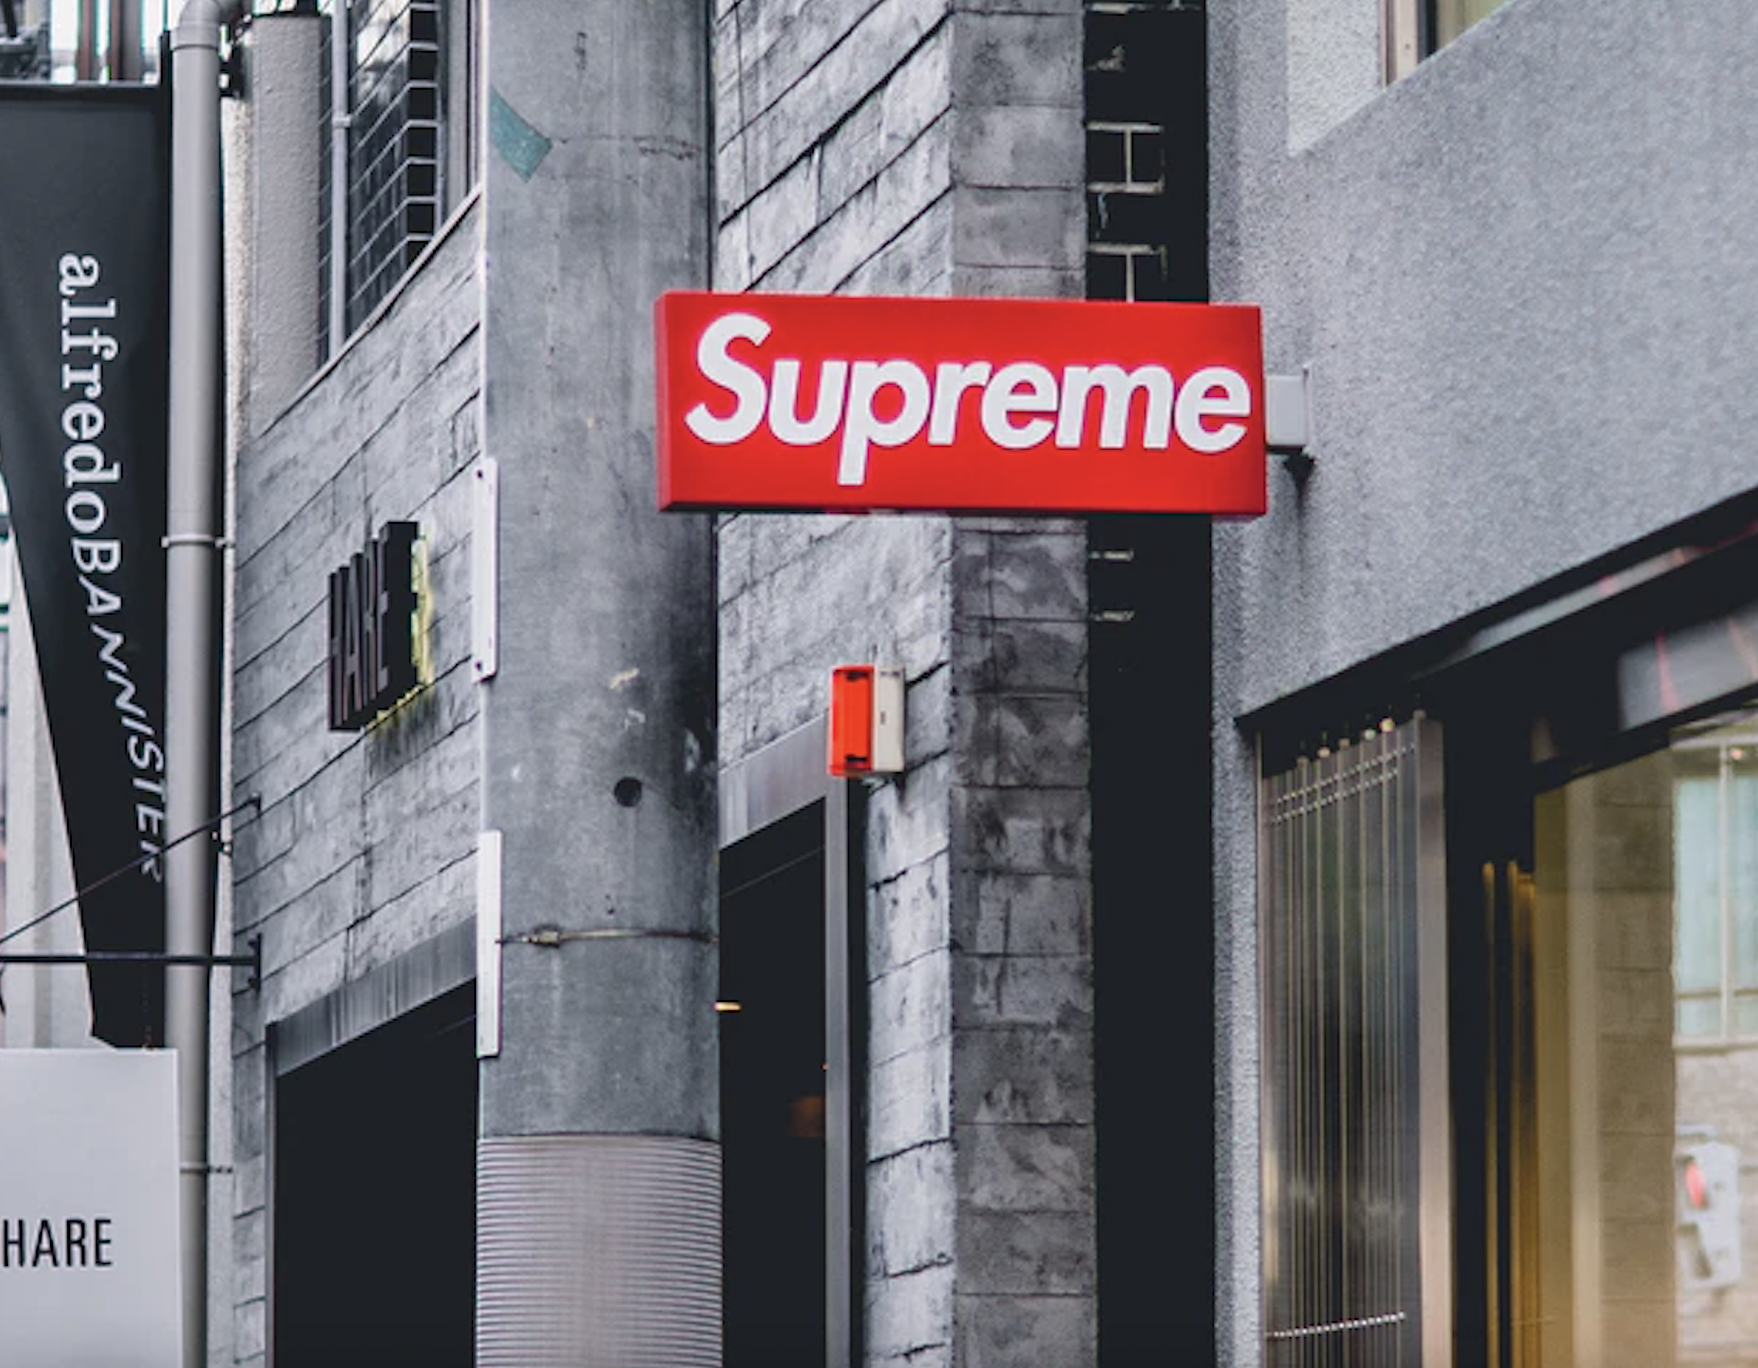 From Legal Fakes to Hijacking a Brand: Has the Supreme Vs Supreme Italia  Feud Finally Come to an End? - Irenebrination: Notes on Architecture, Art,  Fashion, Fashion Law, Science & Technology